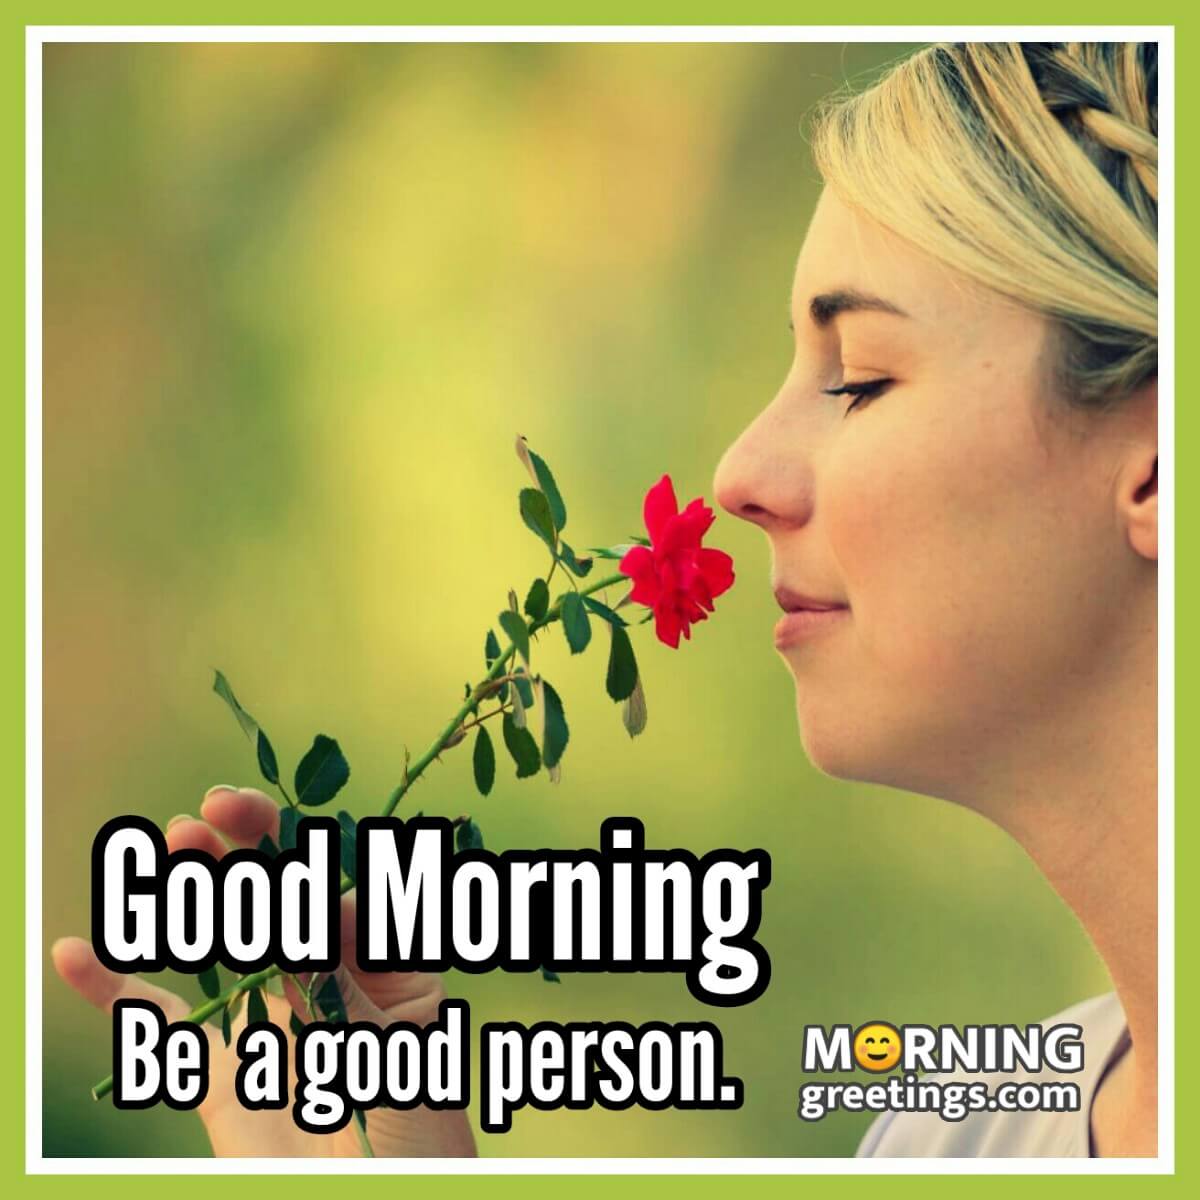 Good Morning Be A Good Person.